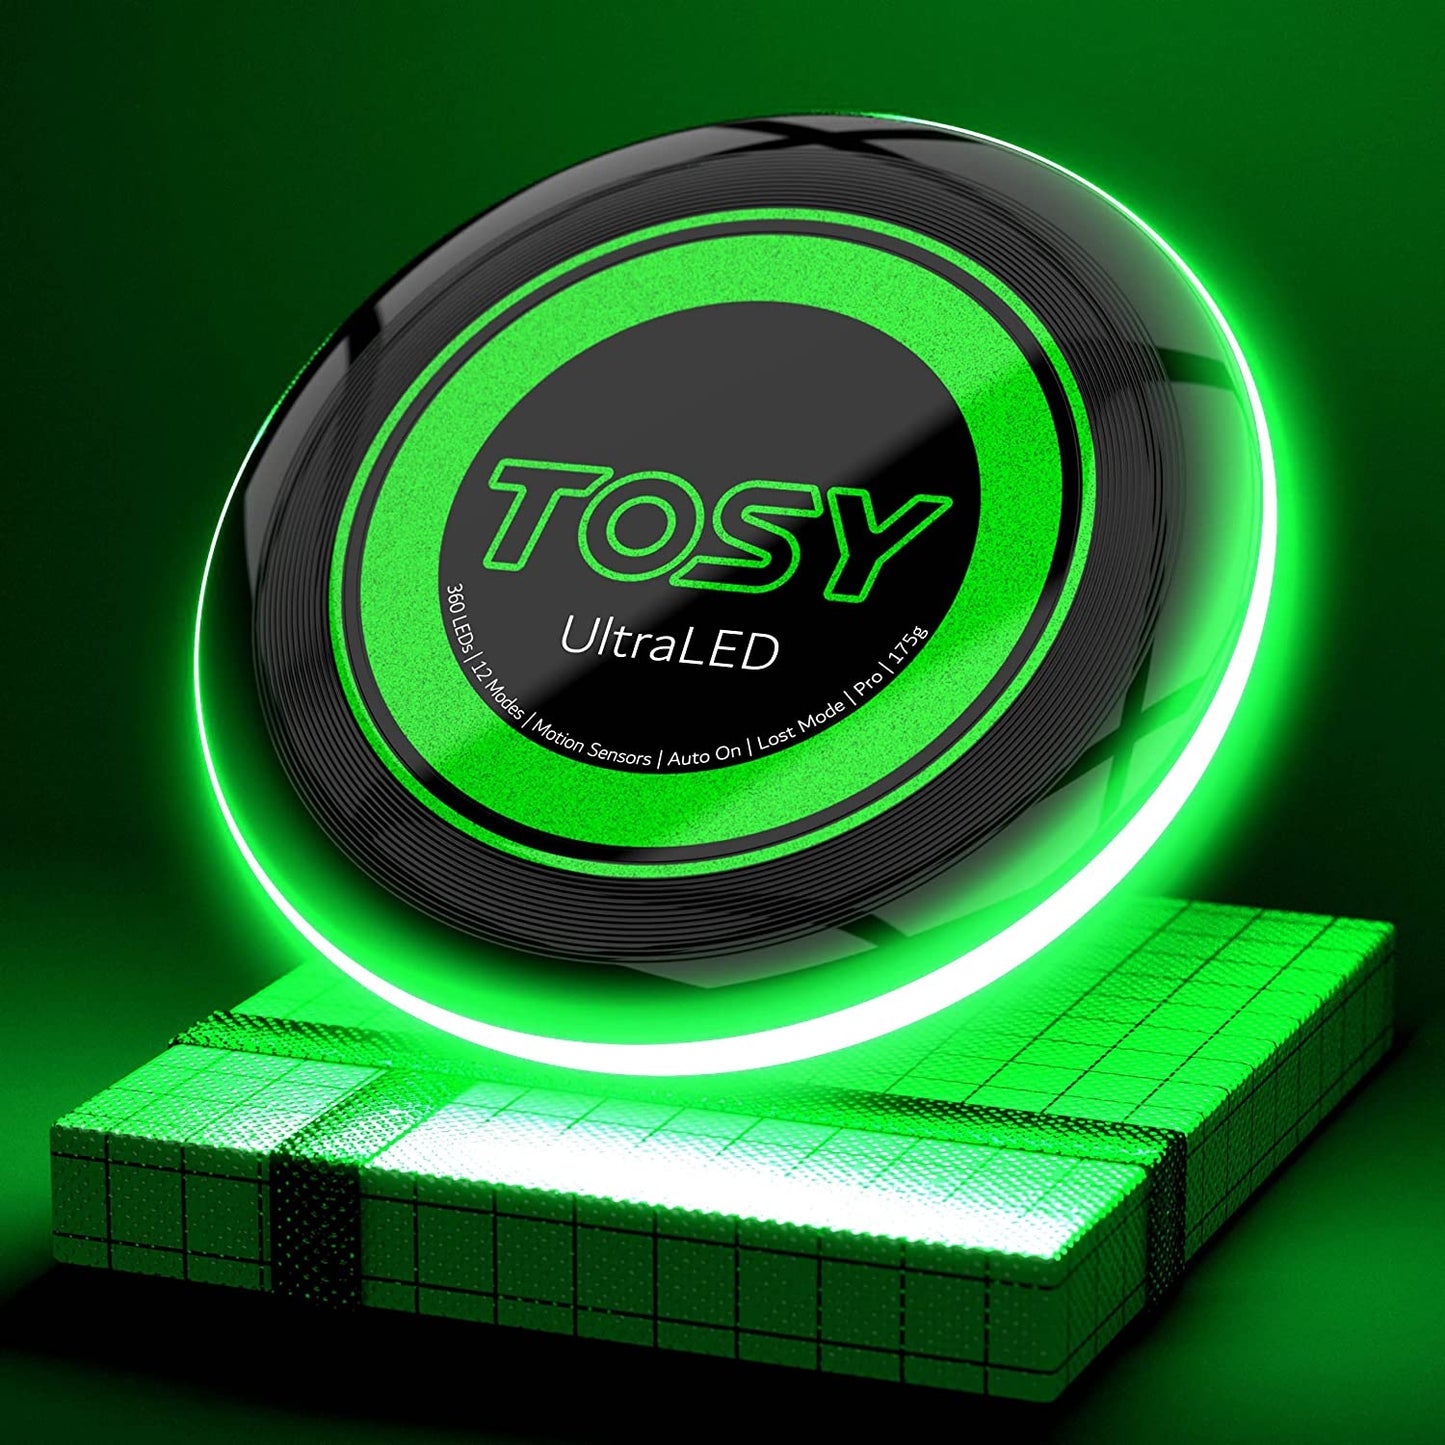 TOSY 36 and 360 LEDs Frisbee - Extremely Bright Flying Disc, Smart Modes, Glow in The Dark, Auto Light Up, Rechargeable, 175g, Perfect Christmas, Birthday & Camping Gift for Men/Boys/Teenagers